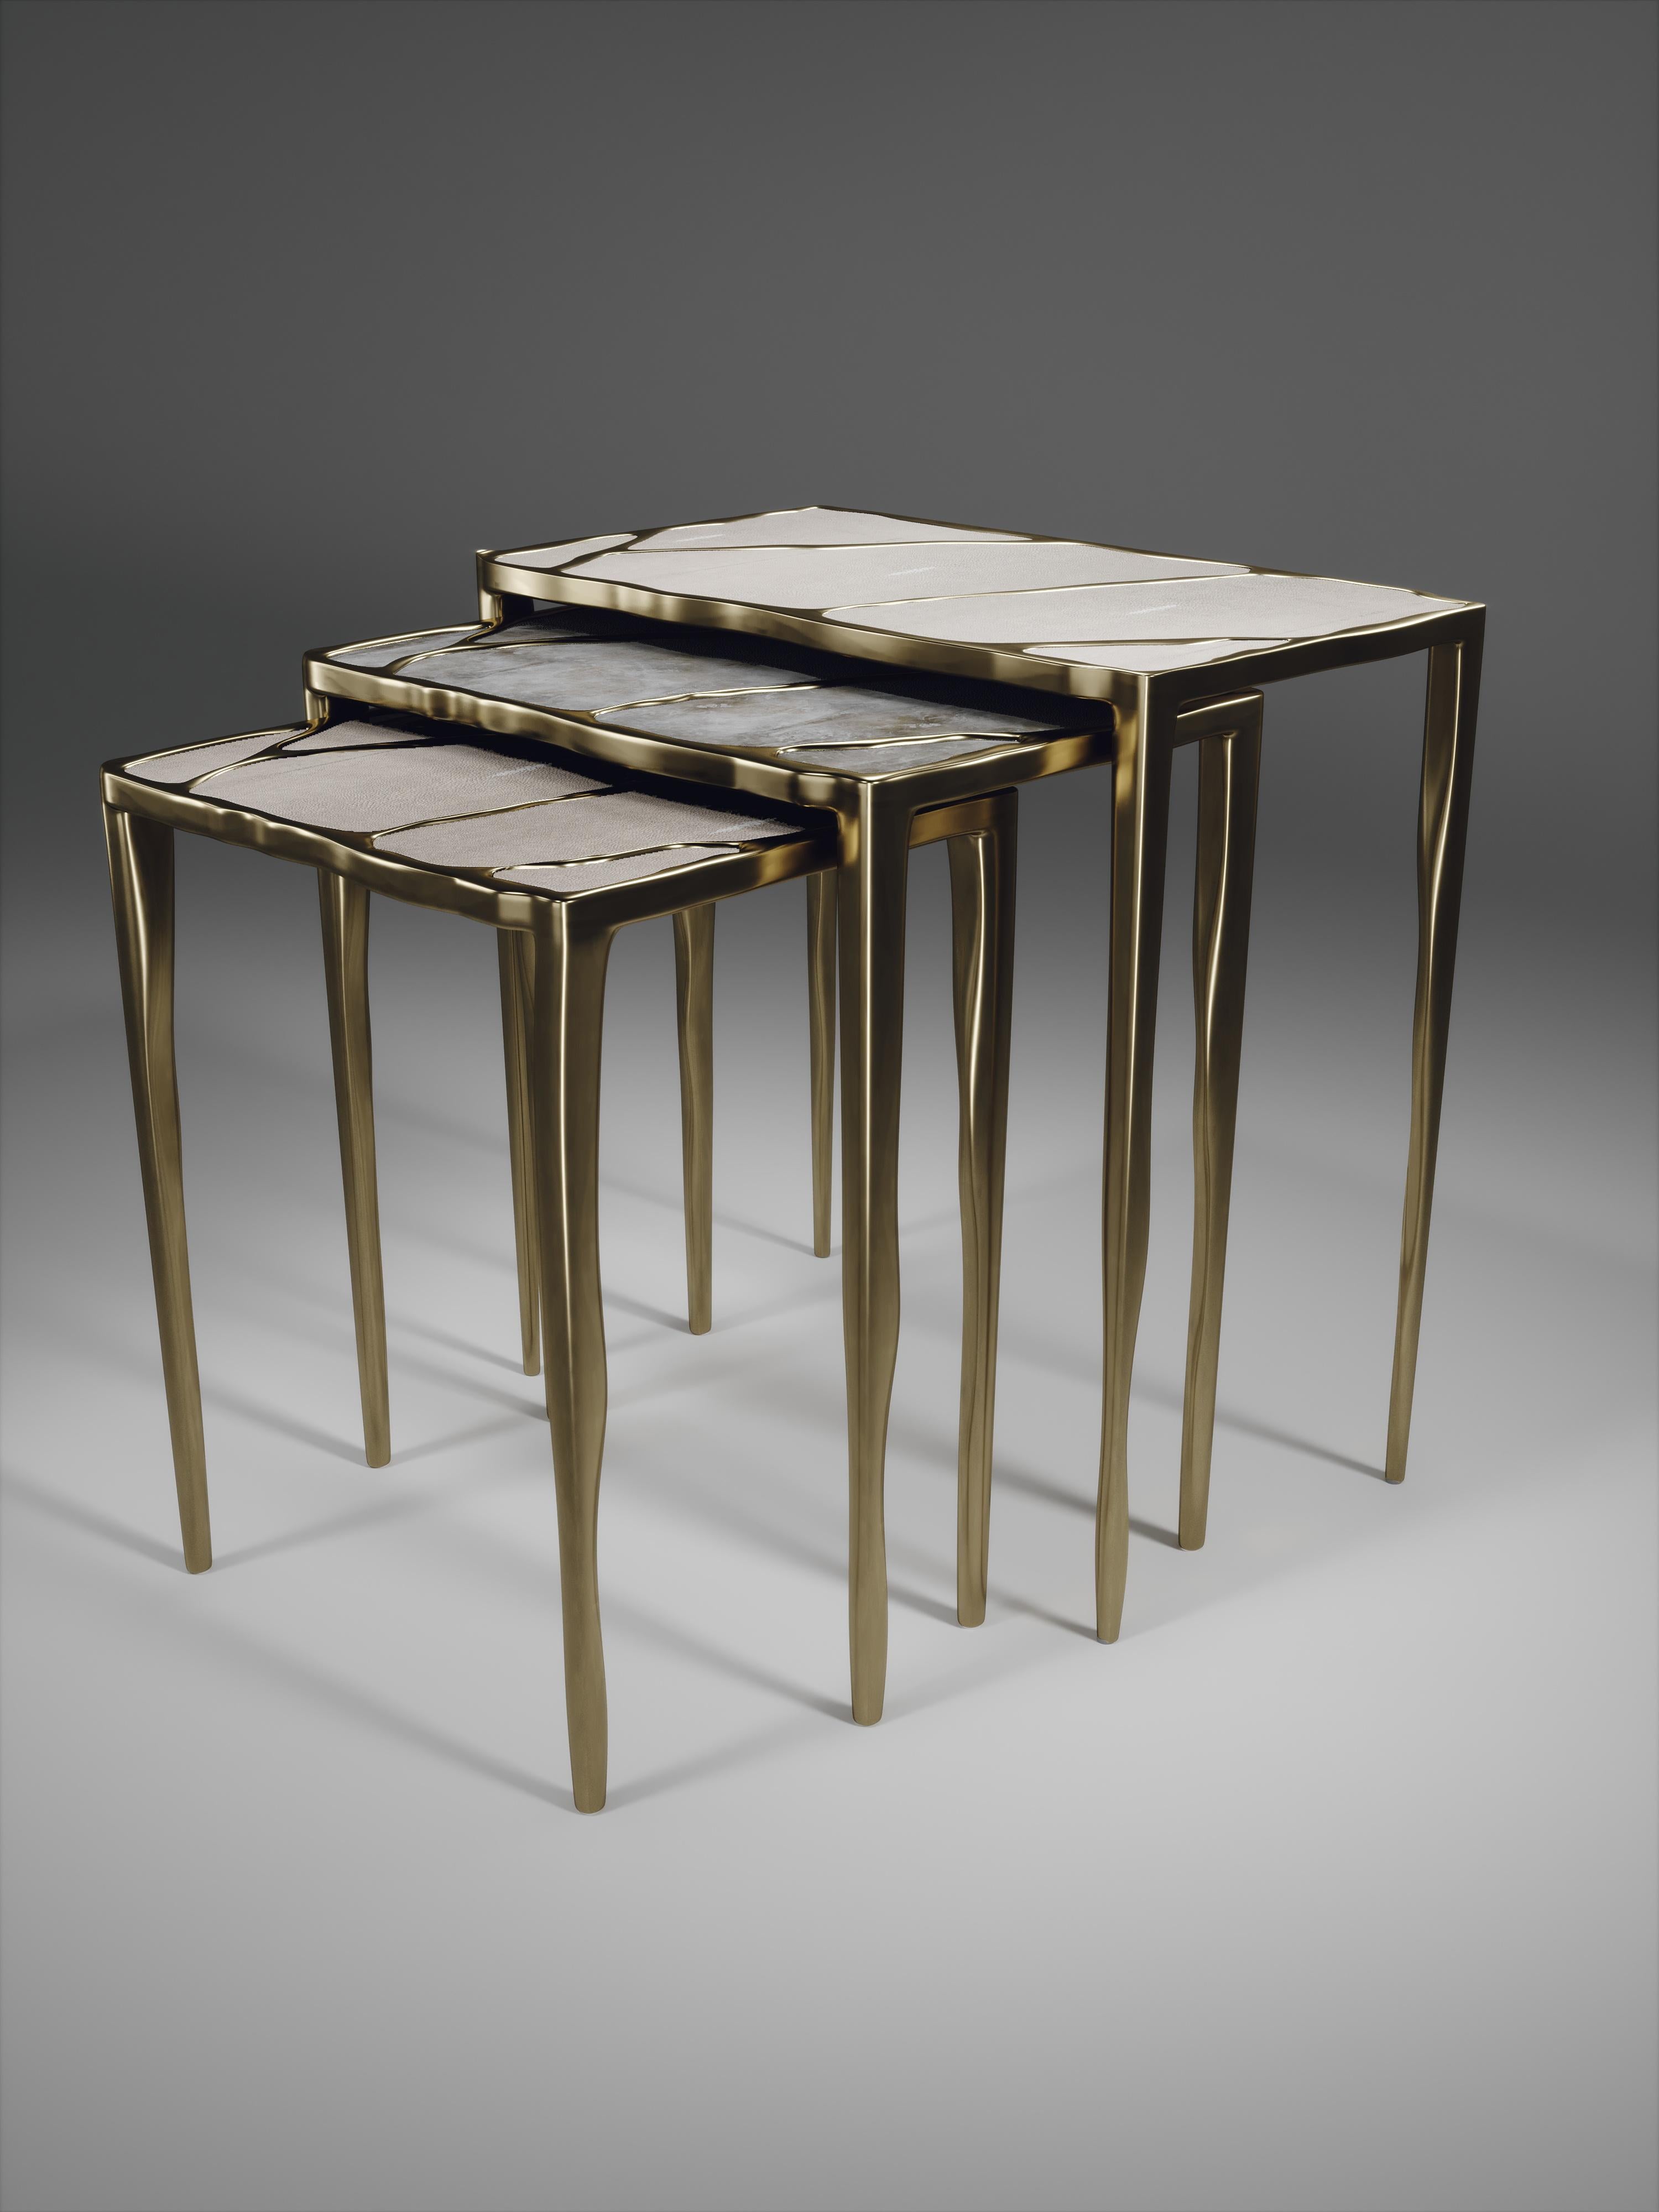 The Melting II nesting side table small, is the perfect accent piece for any living space. These are sold either as a set of 3 to create elegant and geometric shapes, or individually. This listing is for the small size only. The top is inlaid in